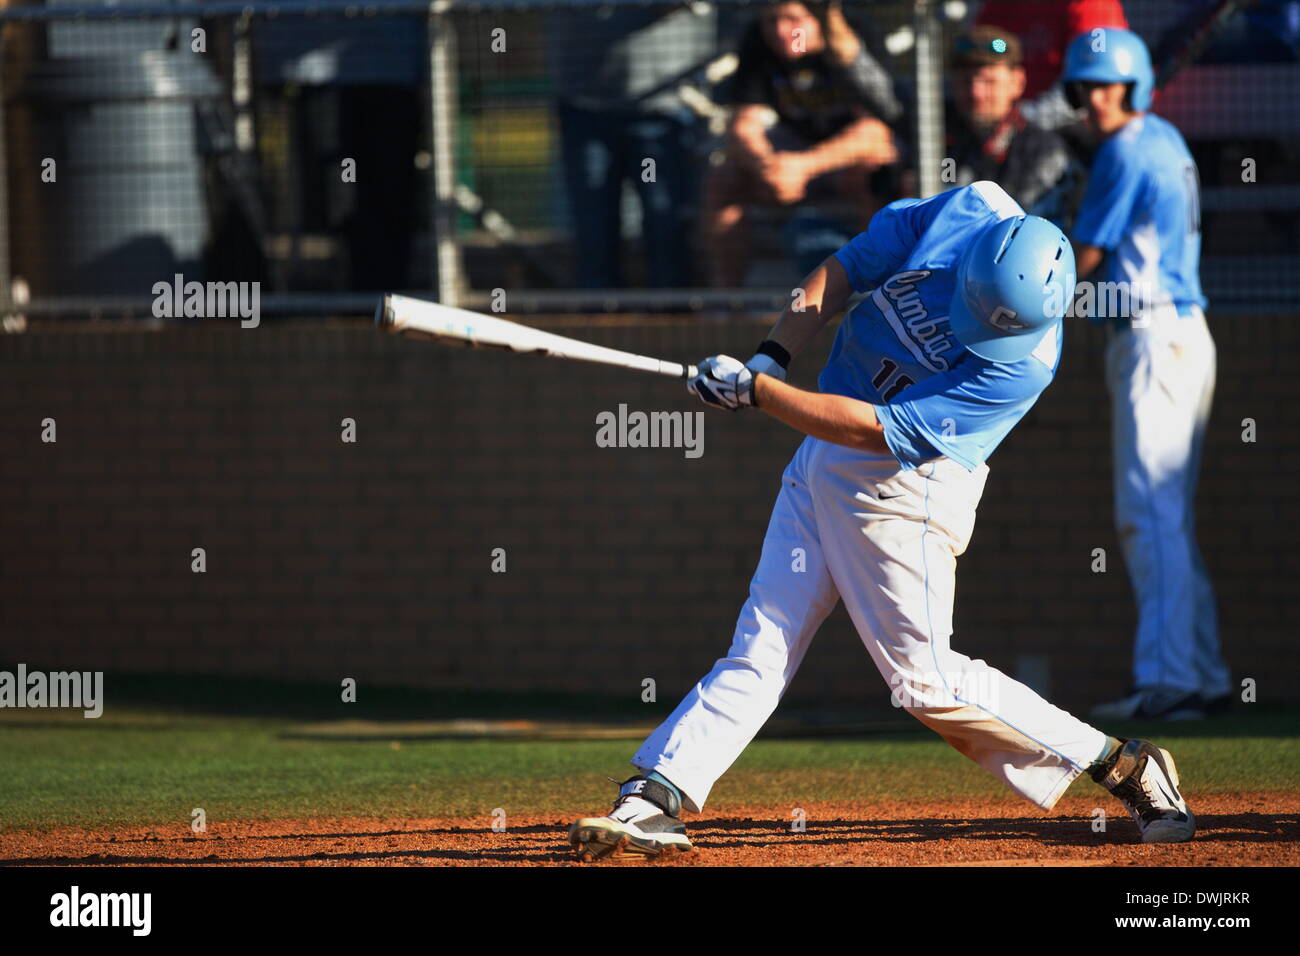 Kennesaw, Georgia, USA.  March 8, 2014 -- David Vandercook (18) swings at a pitch during Saturday's doubleheader between Columbia University and Kennesaw State University.  The teams split the doubleheader.  Columbia one the first game 9-3.  KSU won the night cap 15-1. Credit:  Wayne Hughes | Alamy Live News Stock Photo